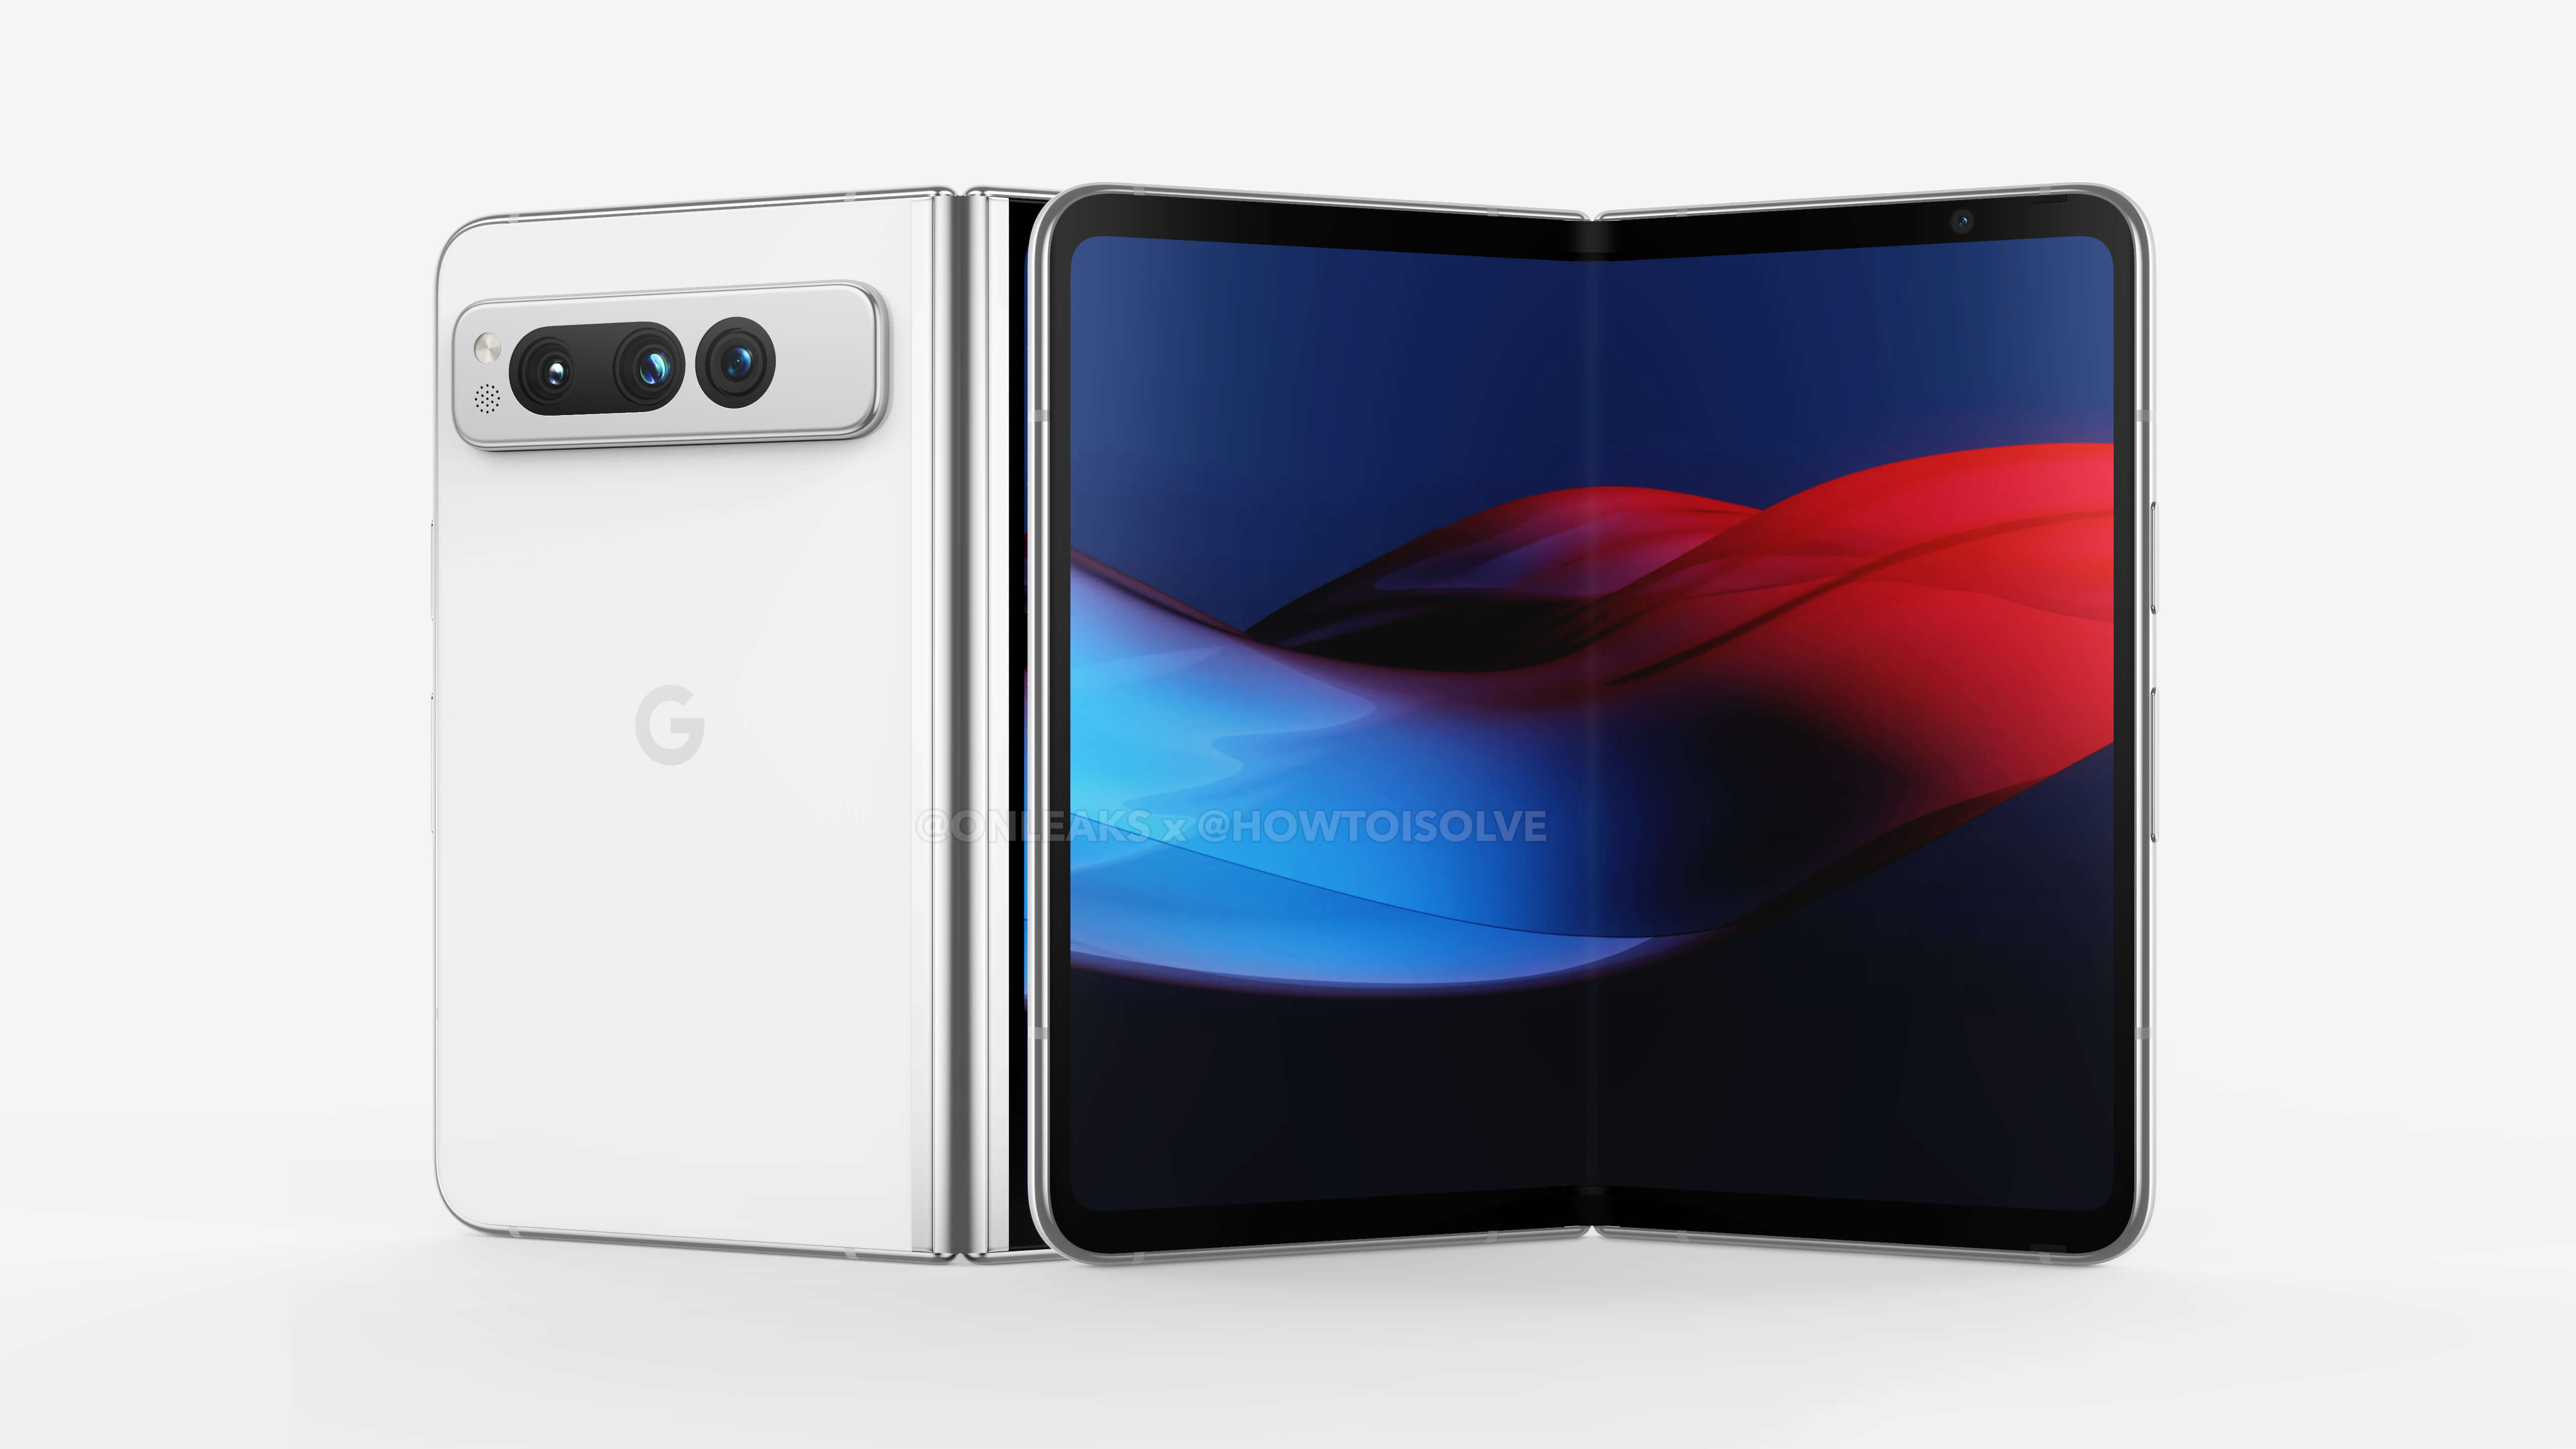 A render of the Google Pixel Fold, based on currently known rumours